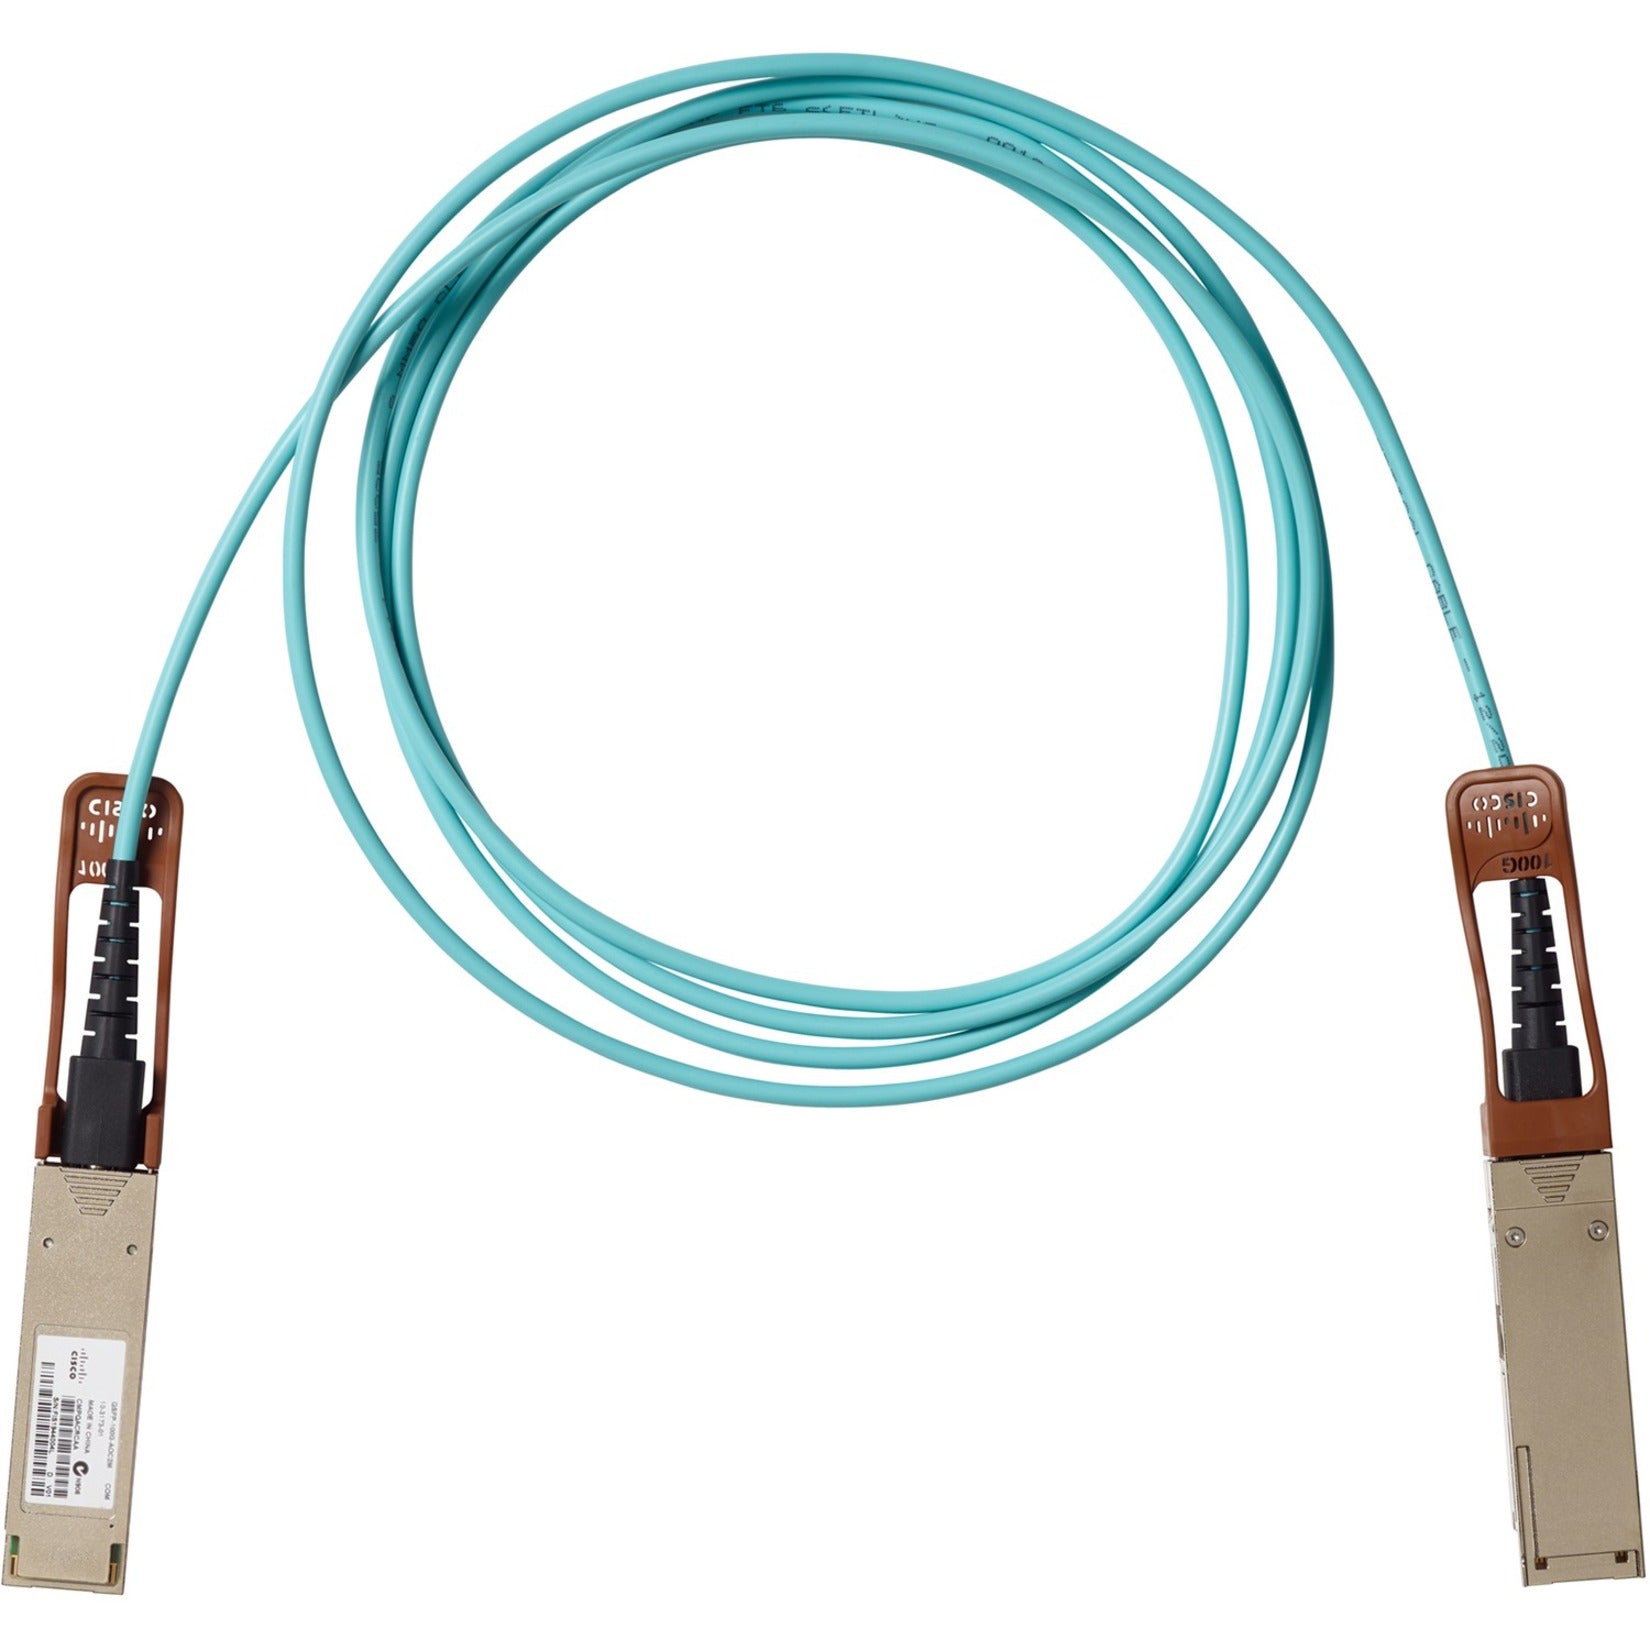 Cisco QSFP-100G-AOC10M= 100GBASE Active Optical Cables 10 Meter, High-Speed Fiber Optic Network Cable